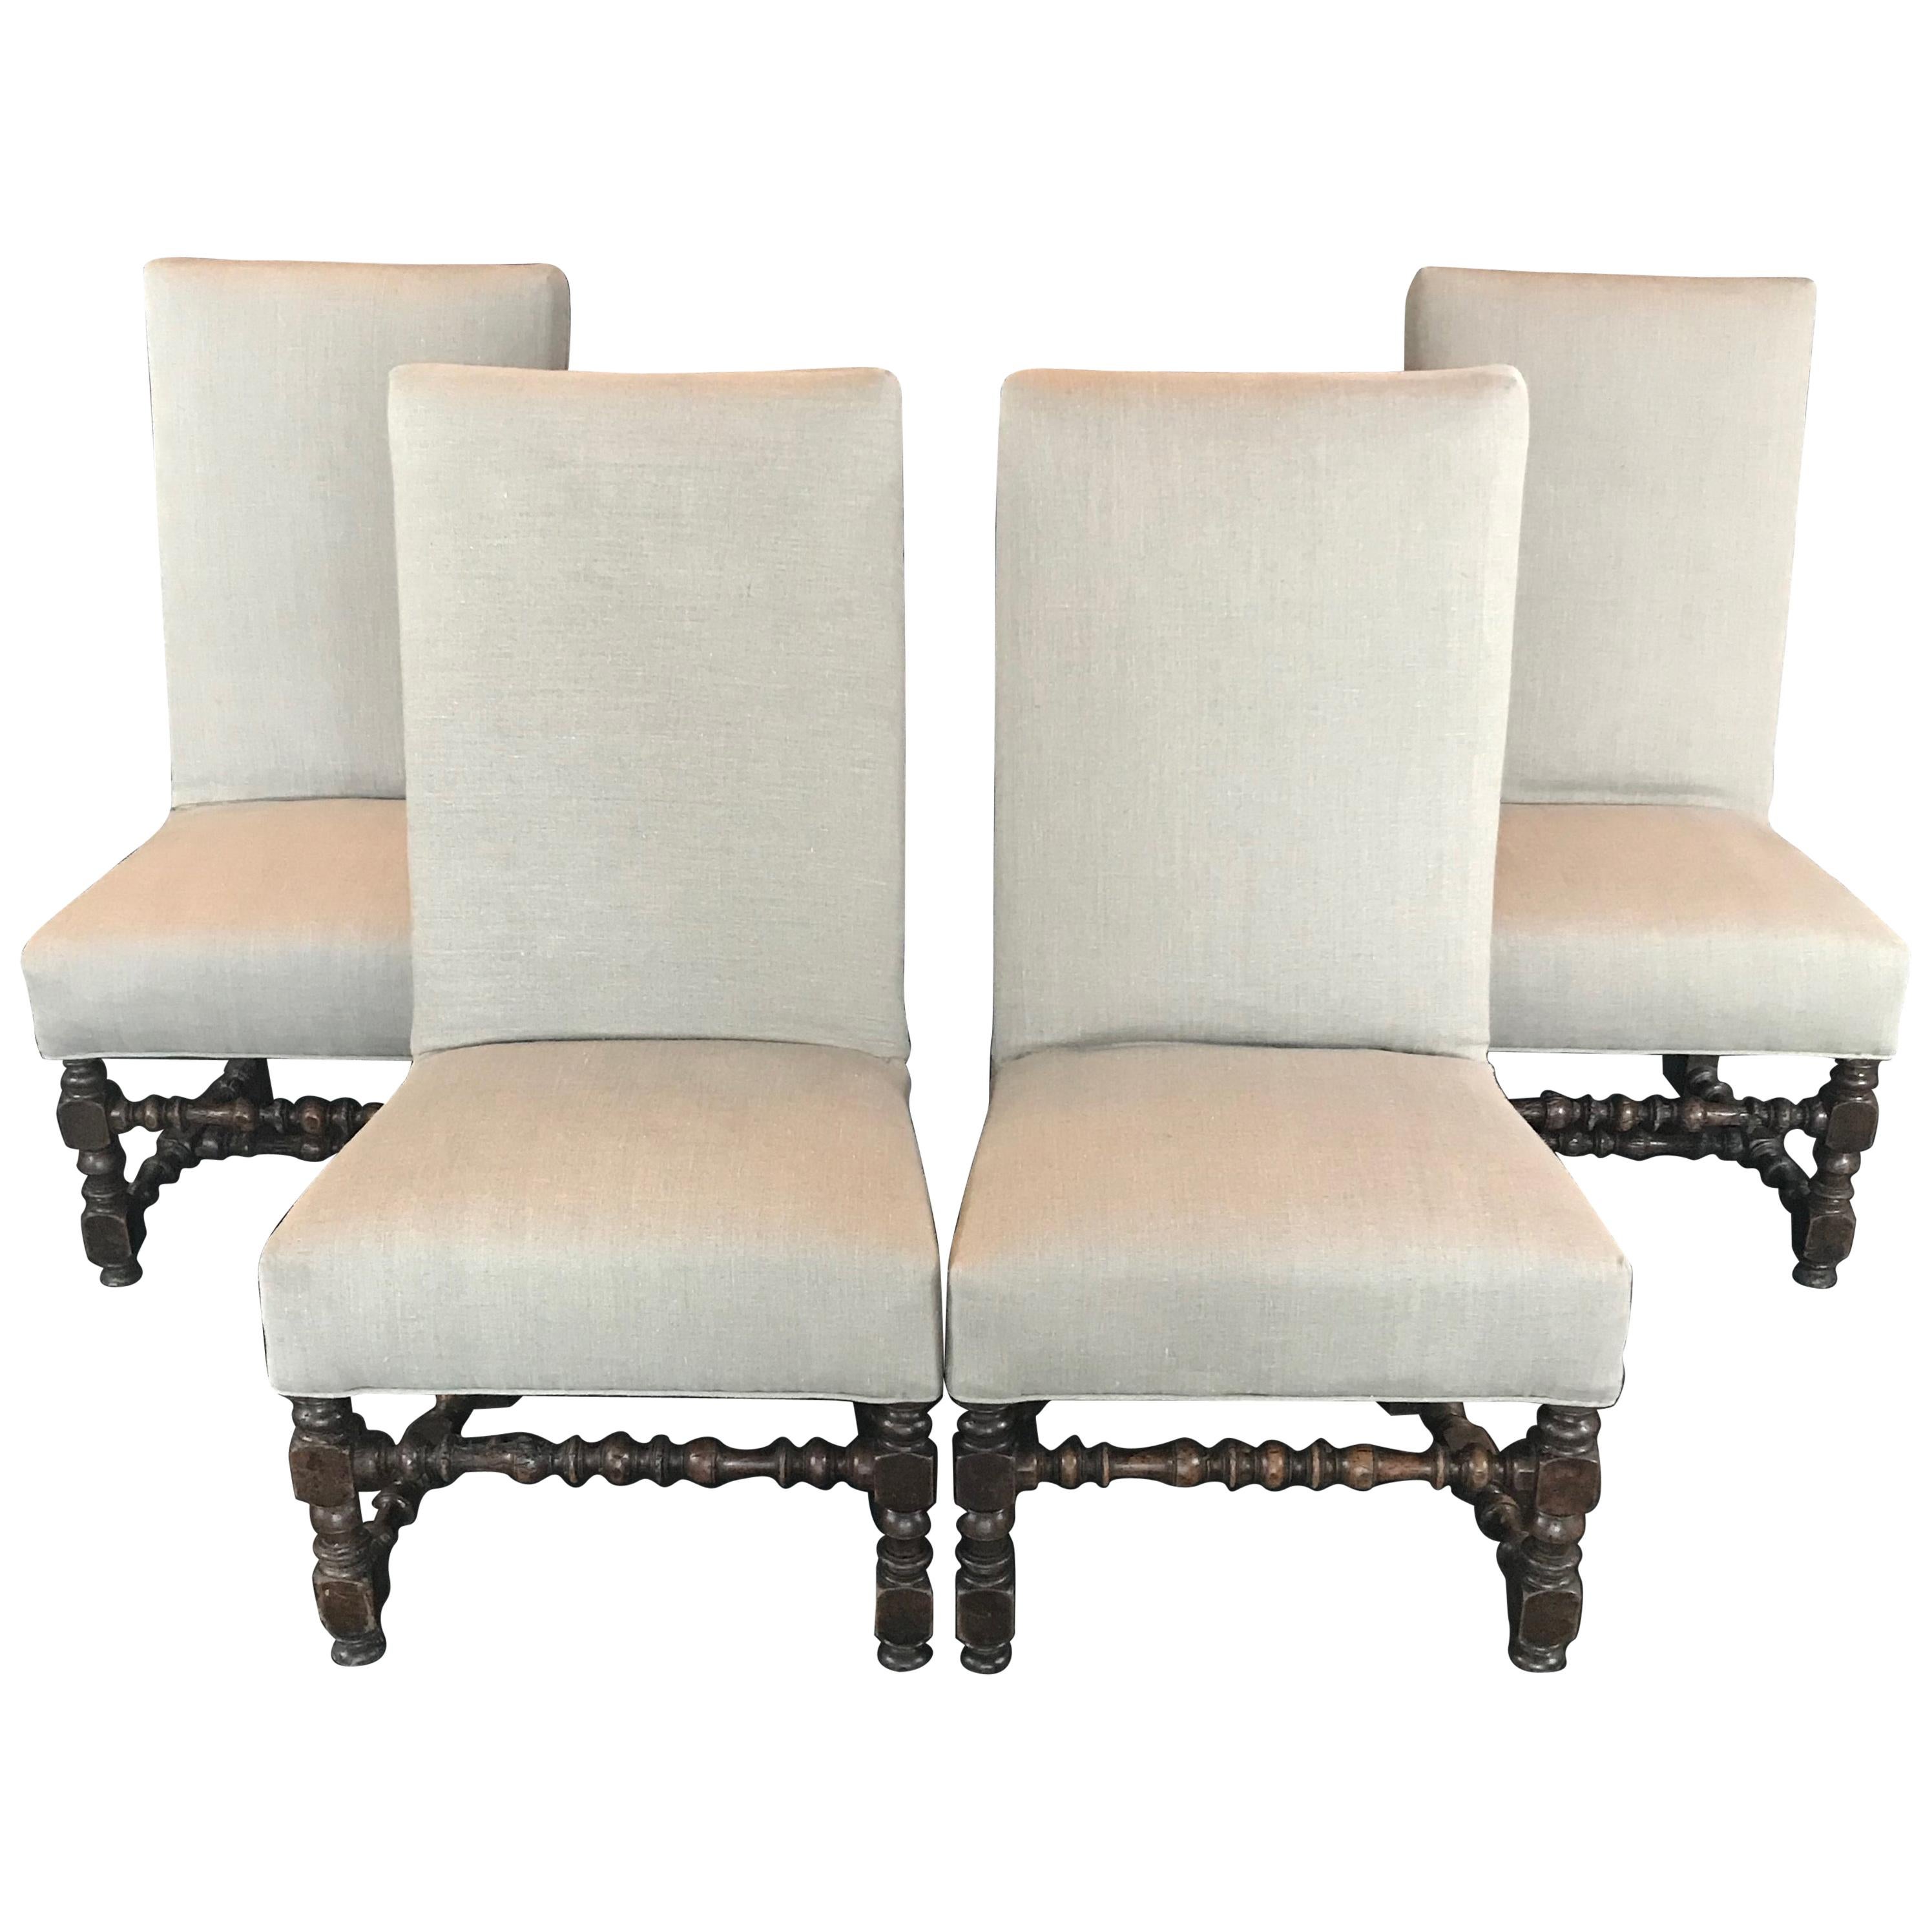  Period French Louis XIV Set of Four Walnut William & Mary Dining Chairs